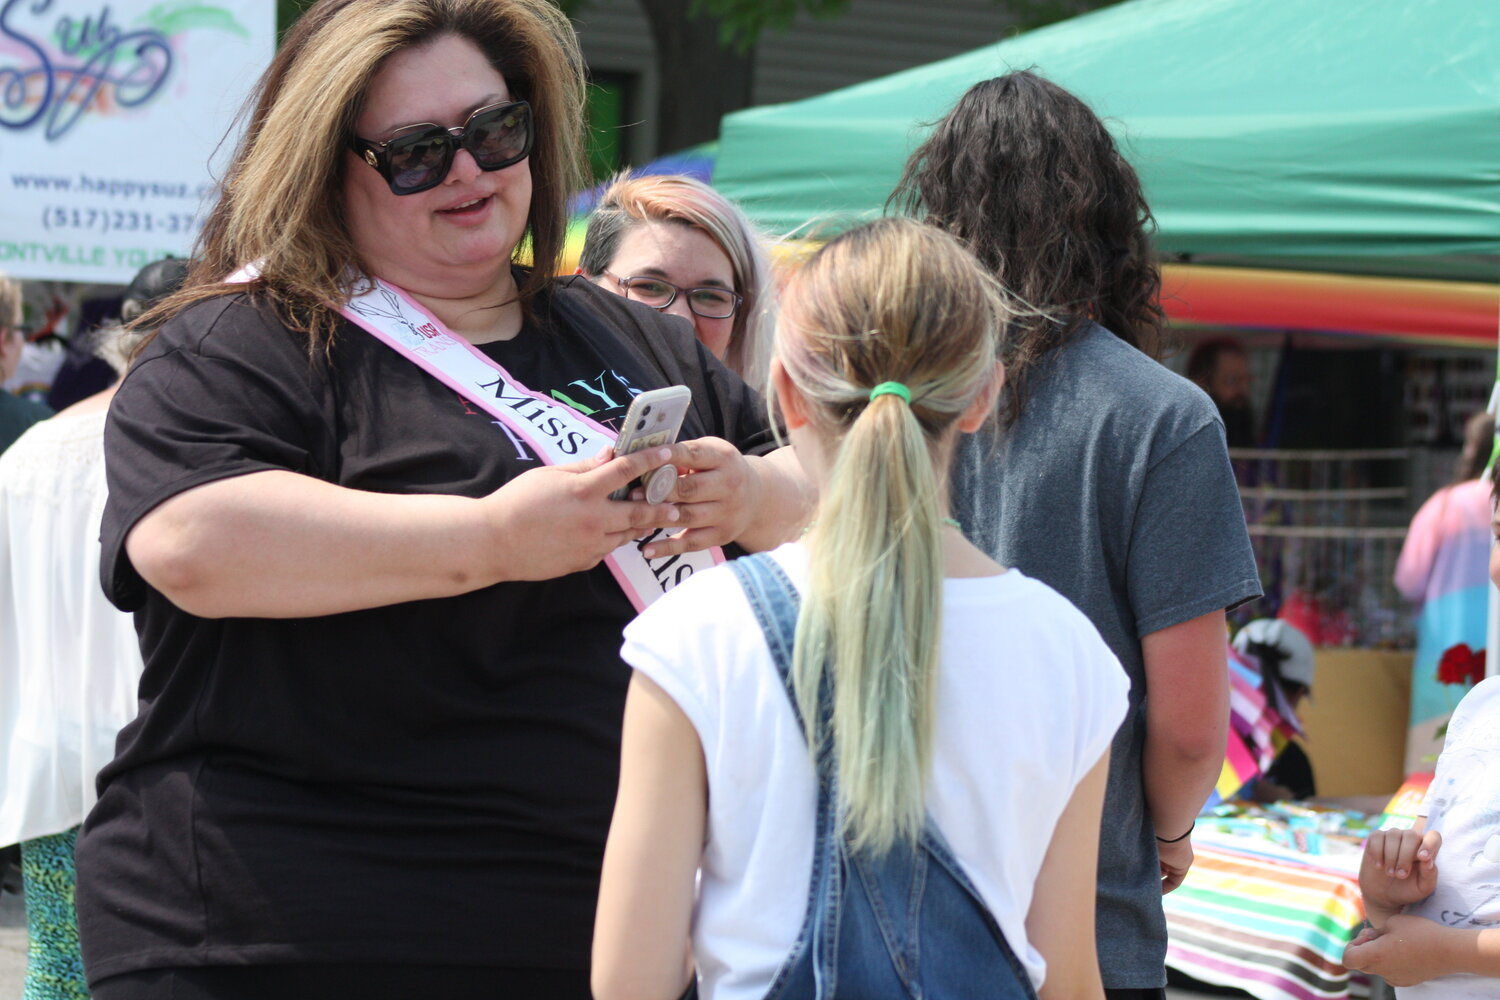 Miss Transgender Michigan Jamie Ashby greets a young admirer at St. Johns’ Pride Fest.